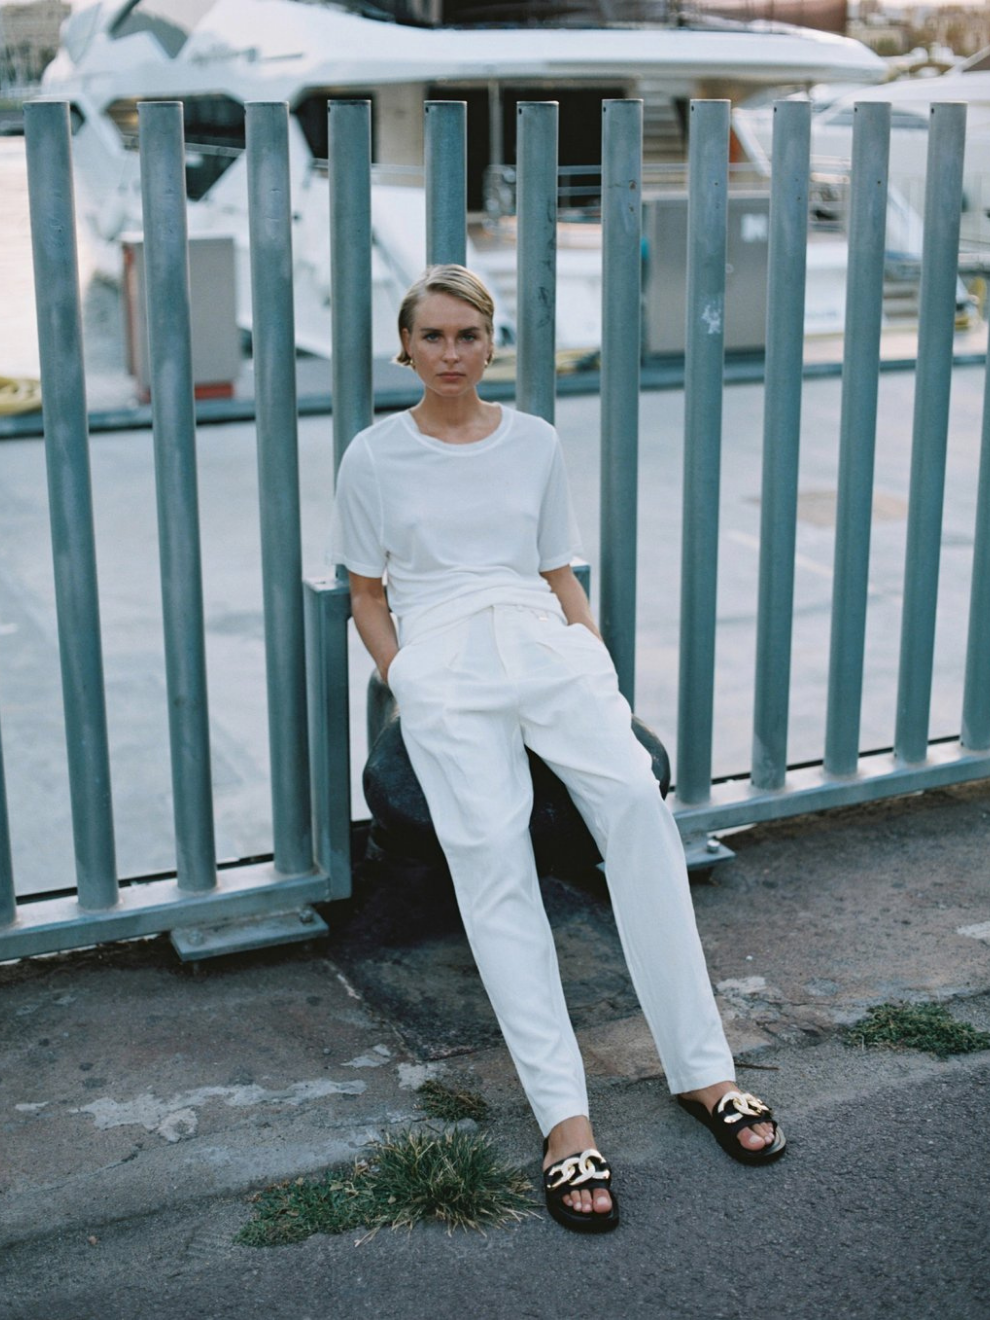 Silk White Ribbed T-shirt by Silk Laundry styled with Linen Pants in White for Monochromatic look.